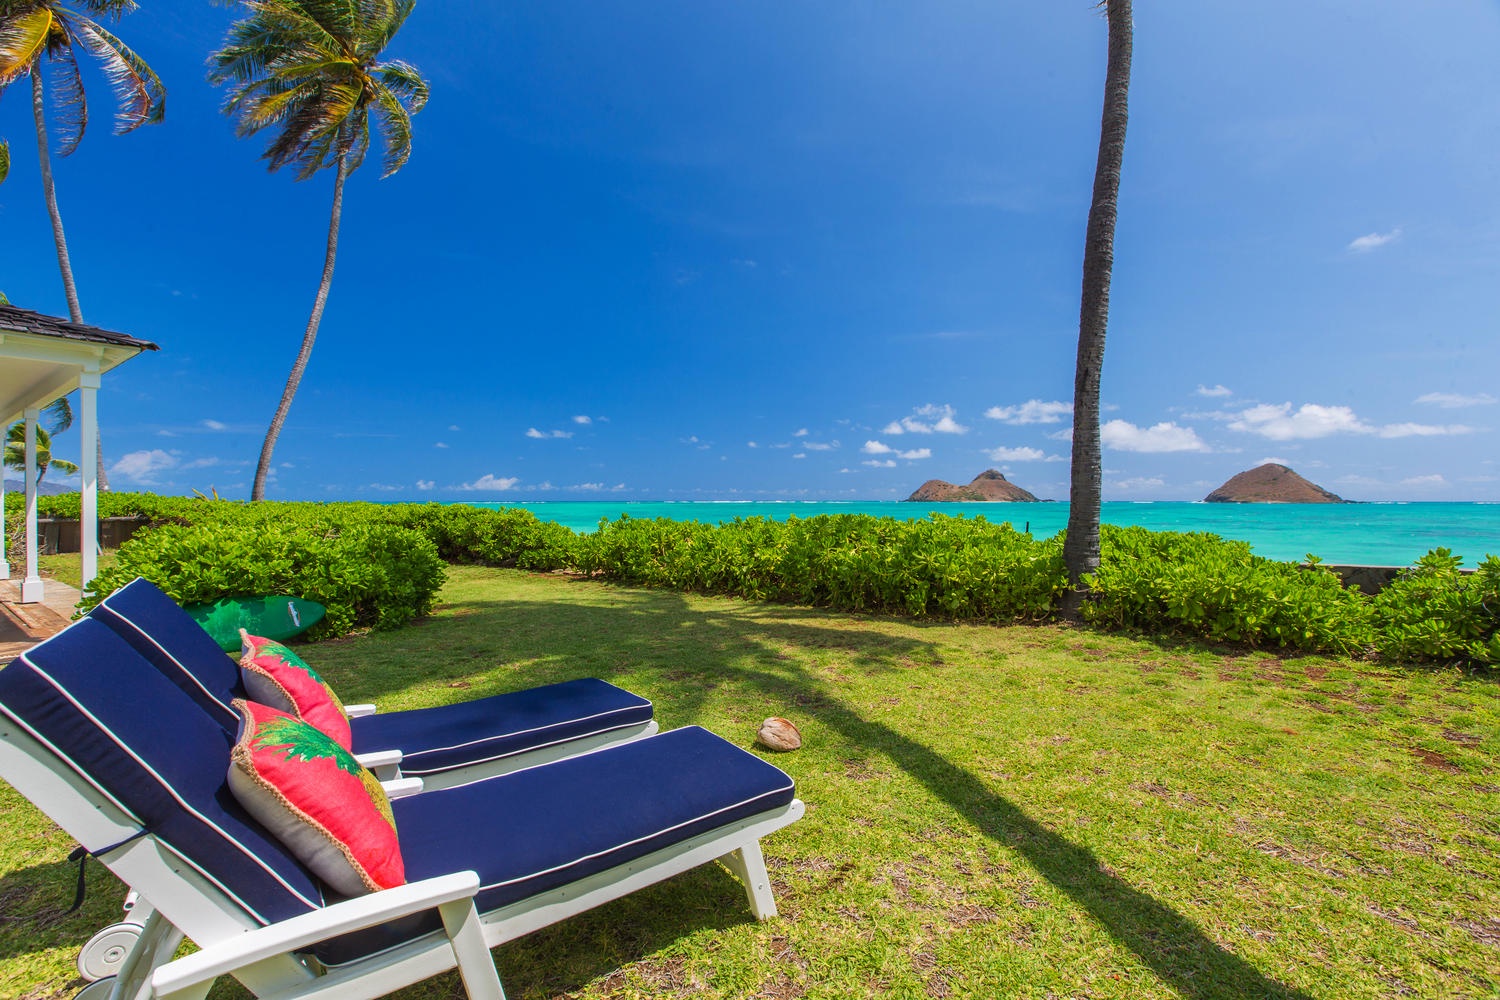 Kailua Vacation Rentals, Lanikai Oceanside 4 Bedroom - Chaise lounge chairs in back yard.